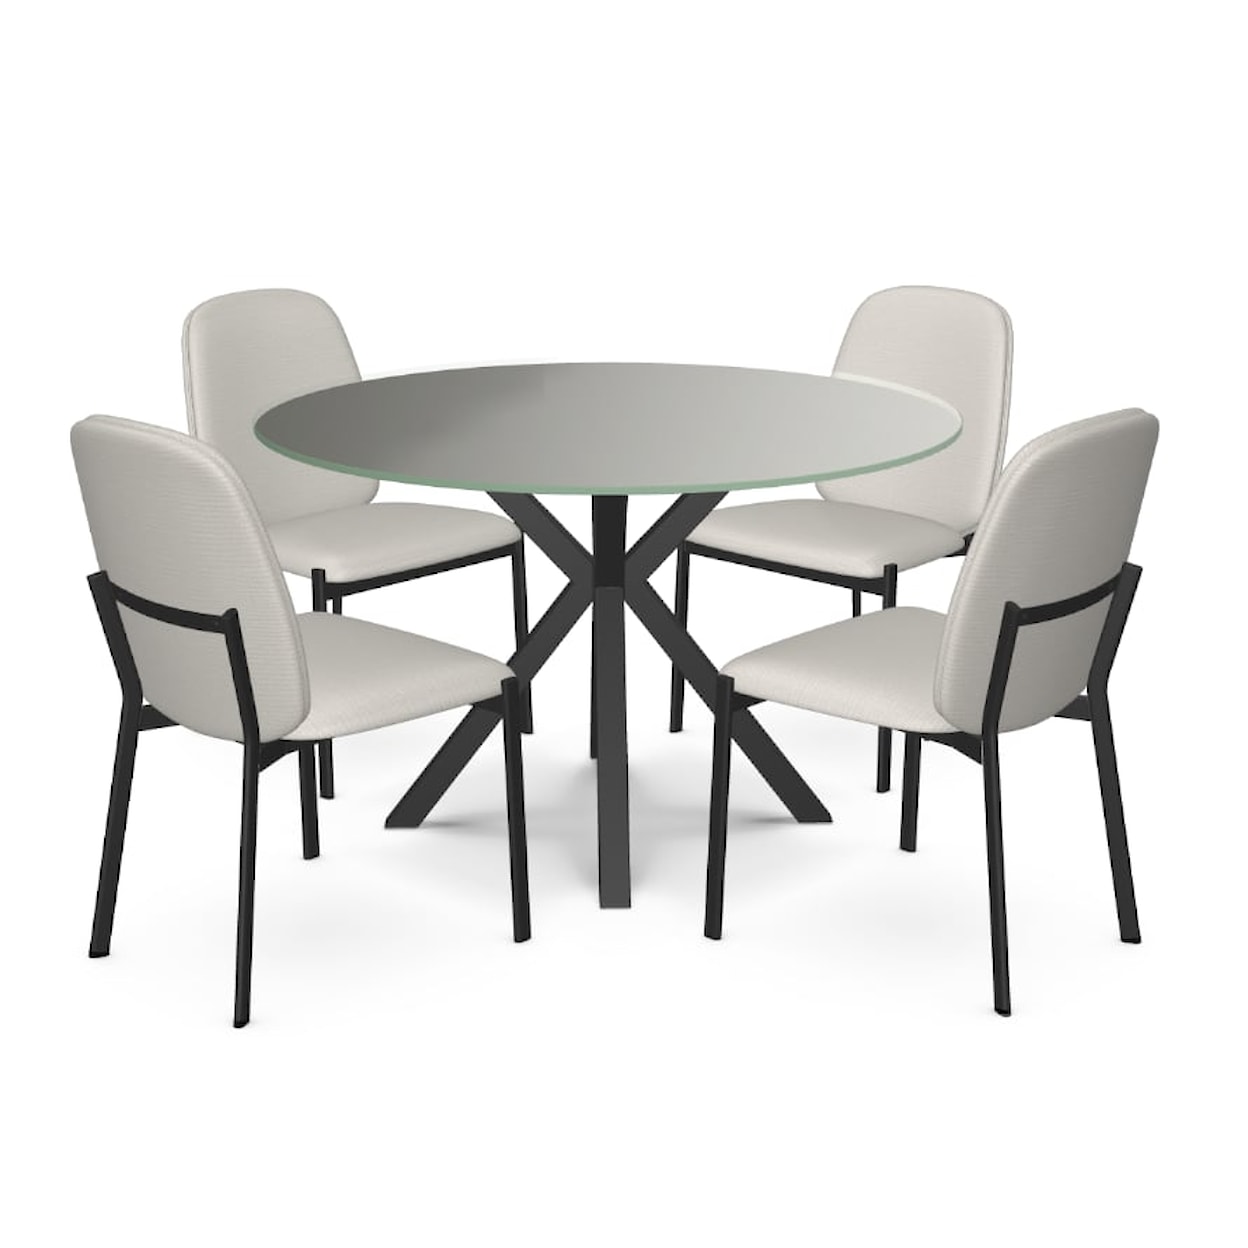 Amisco Asterisk 5 Piece Contemporary Set w/ Glass Top Table